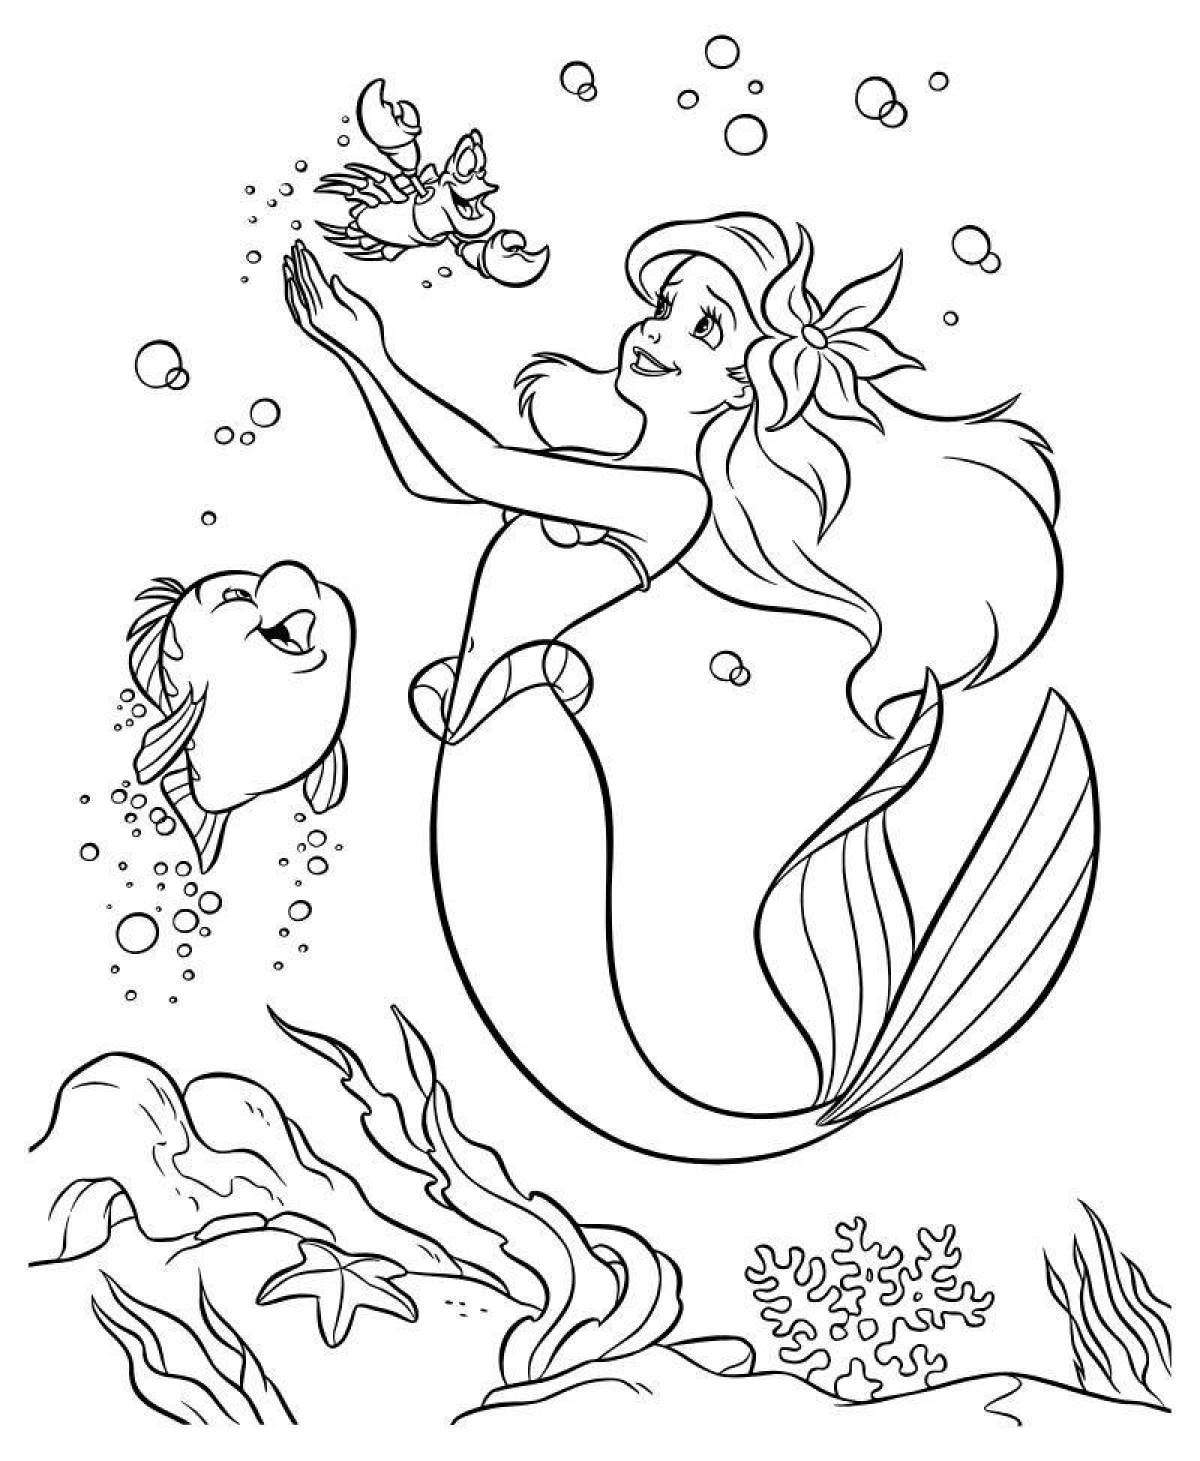 Colourful mermaid coloring book for children 3-4 years old